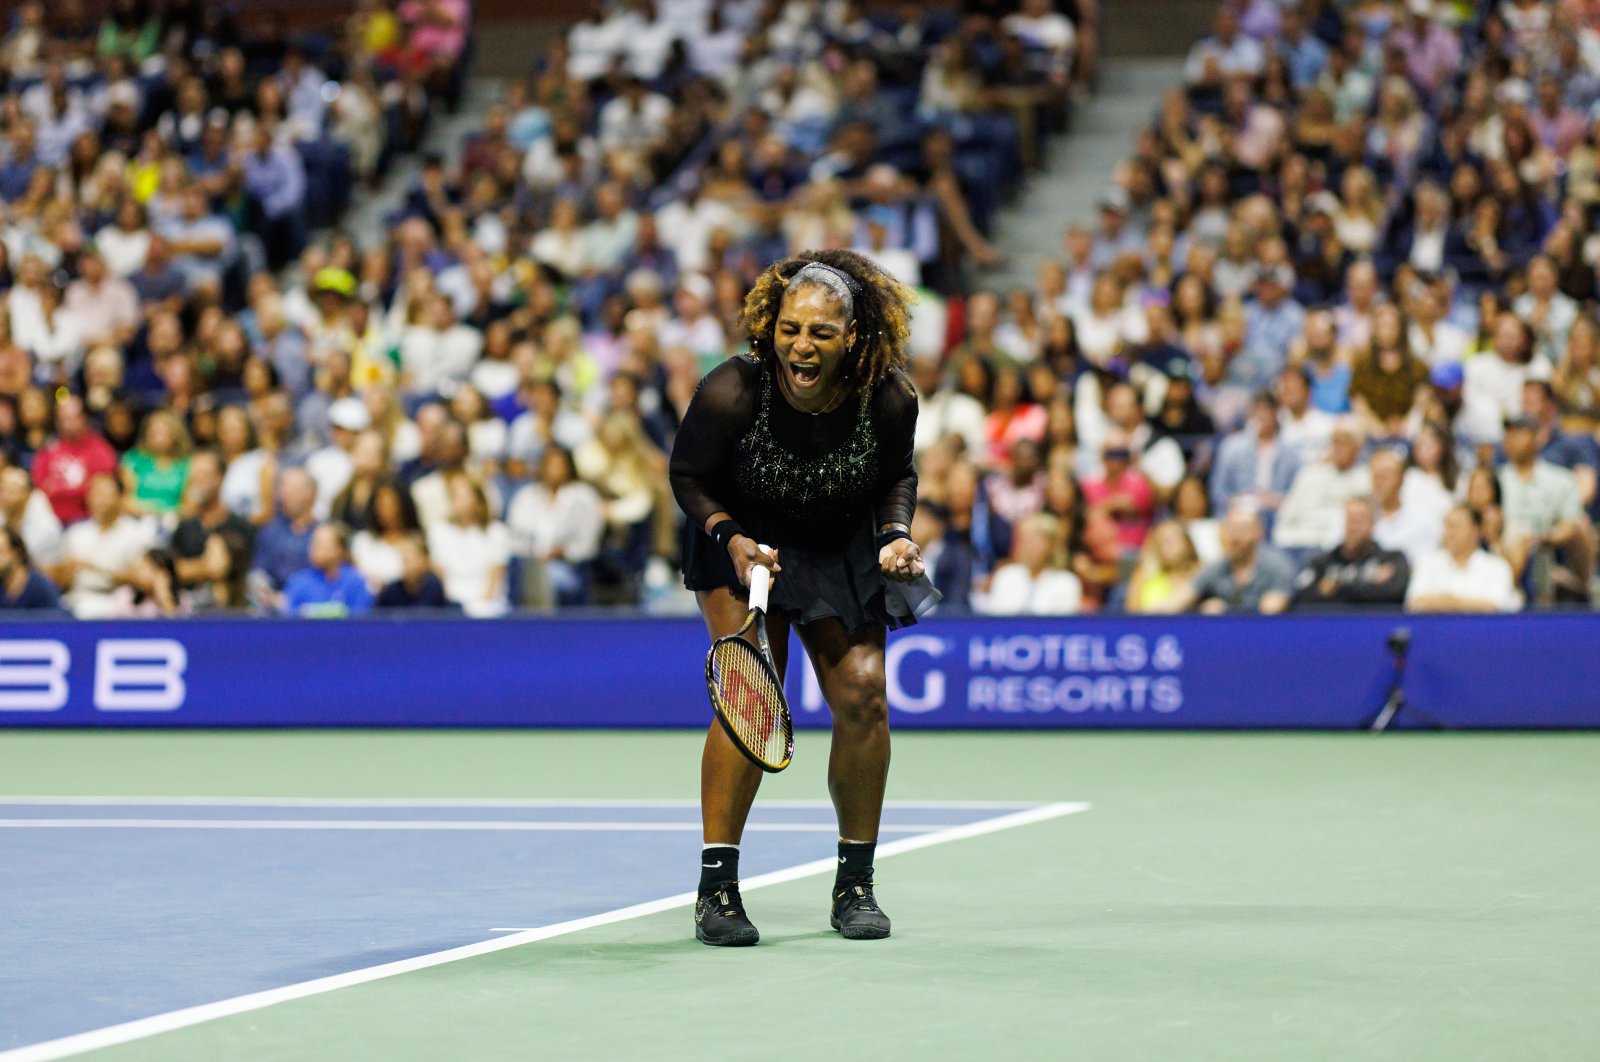 U.S.&#039; Serena Williams celebrates during her match against Australia&#039;s Ajla Tomljanovic in the third round of the women&#039;s singles at the U.S. Open at the USTA Billie Jean King National Tennis Center, New York City, U.S., Sept. 2, 2022. (Getty Images Photo)